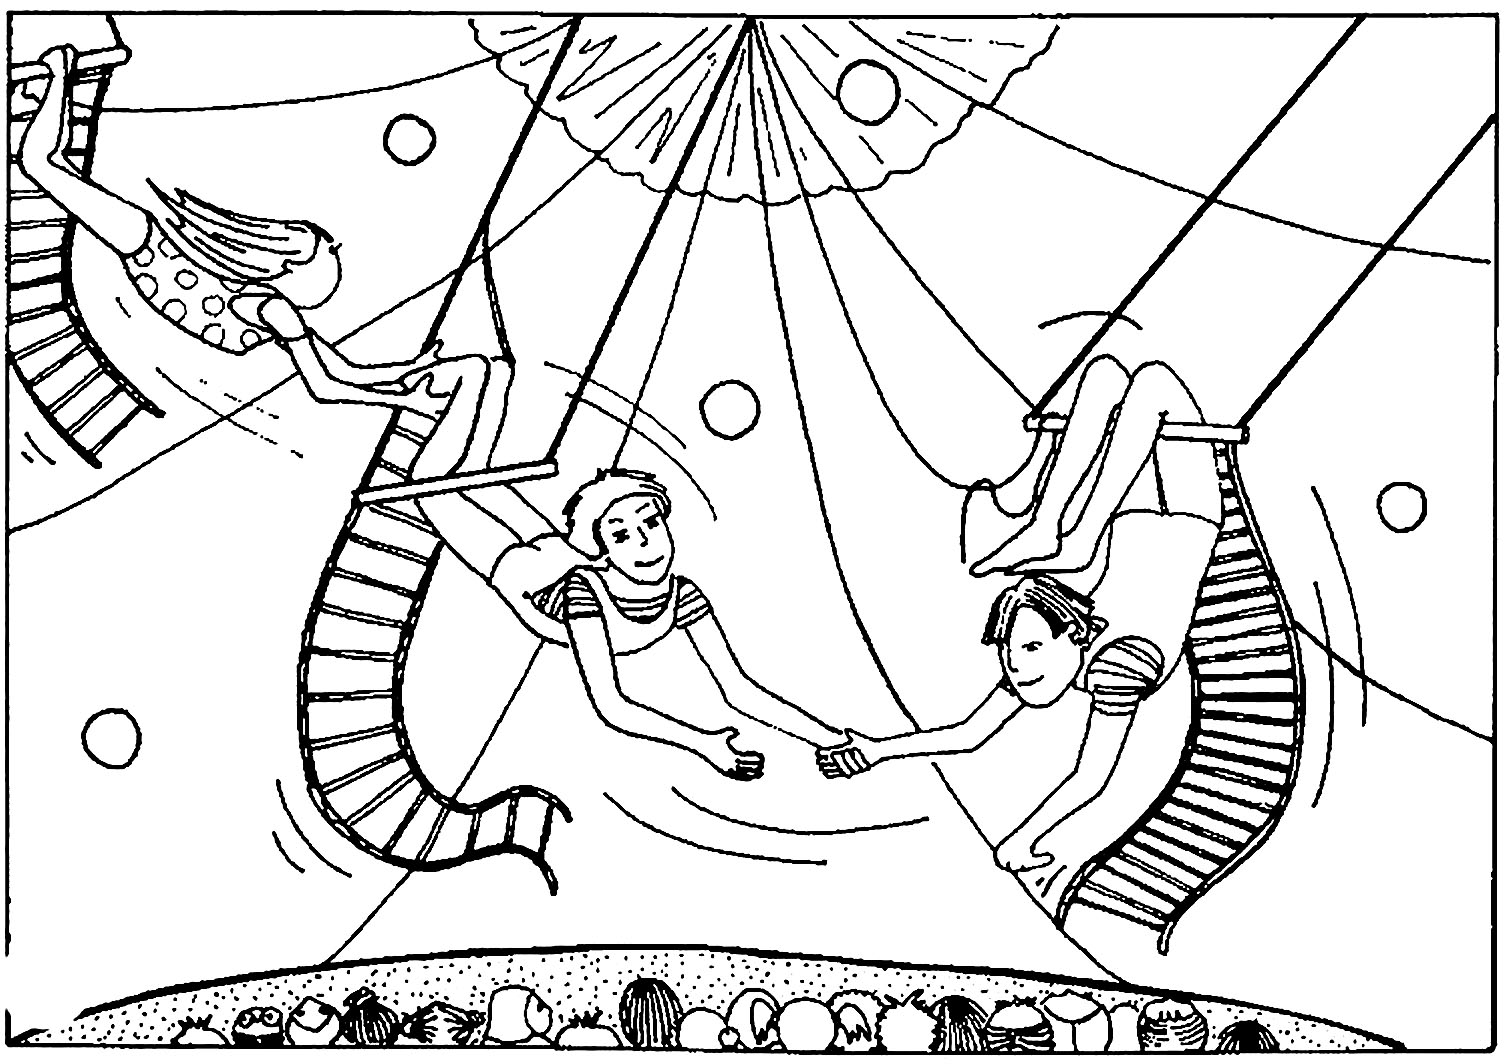 Circus image to print and color